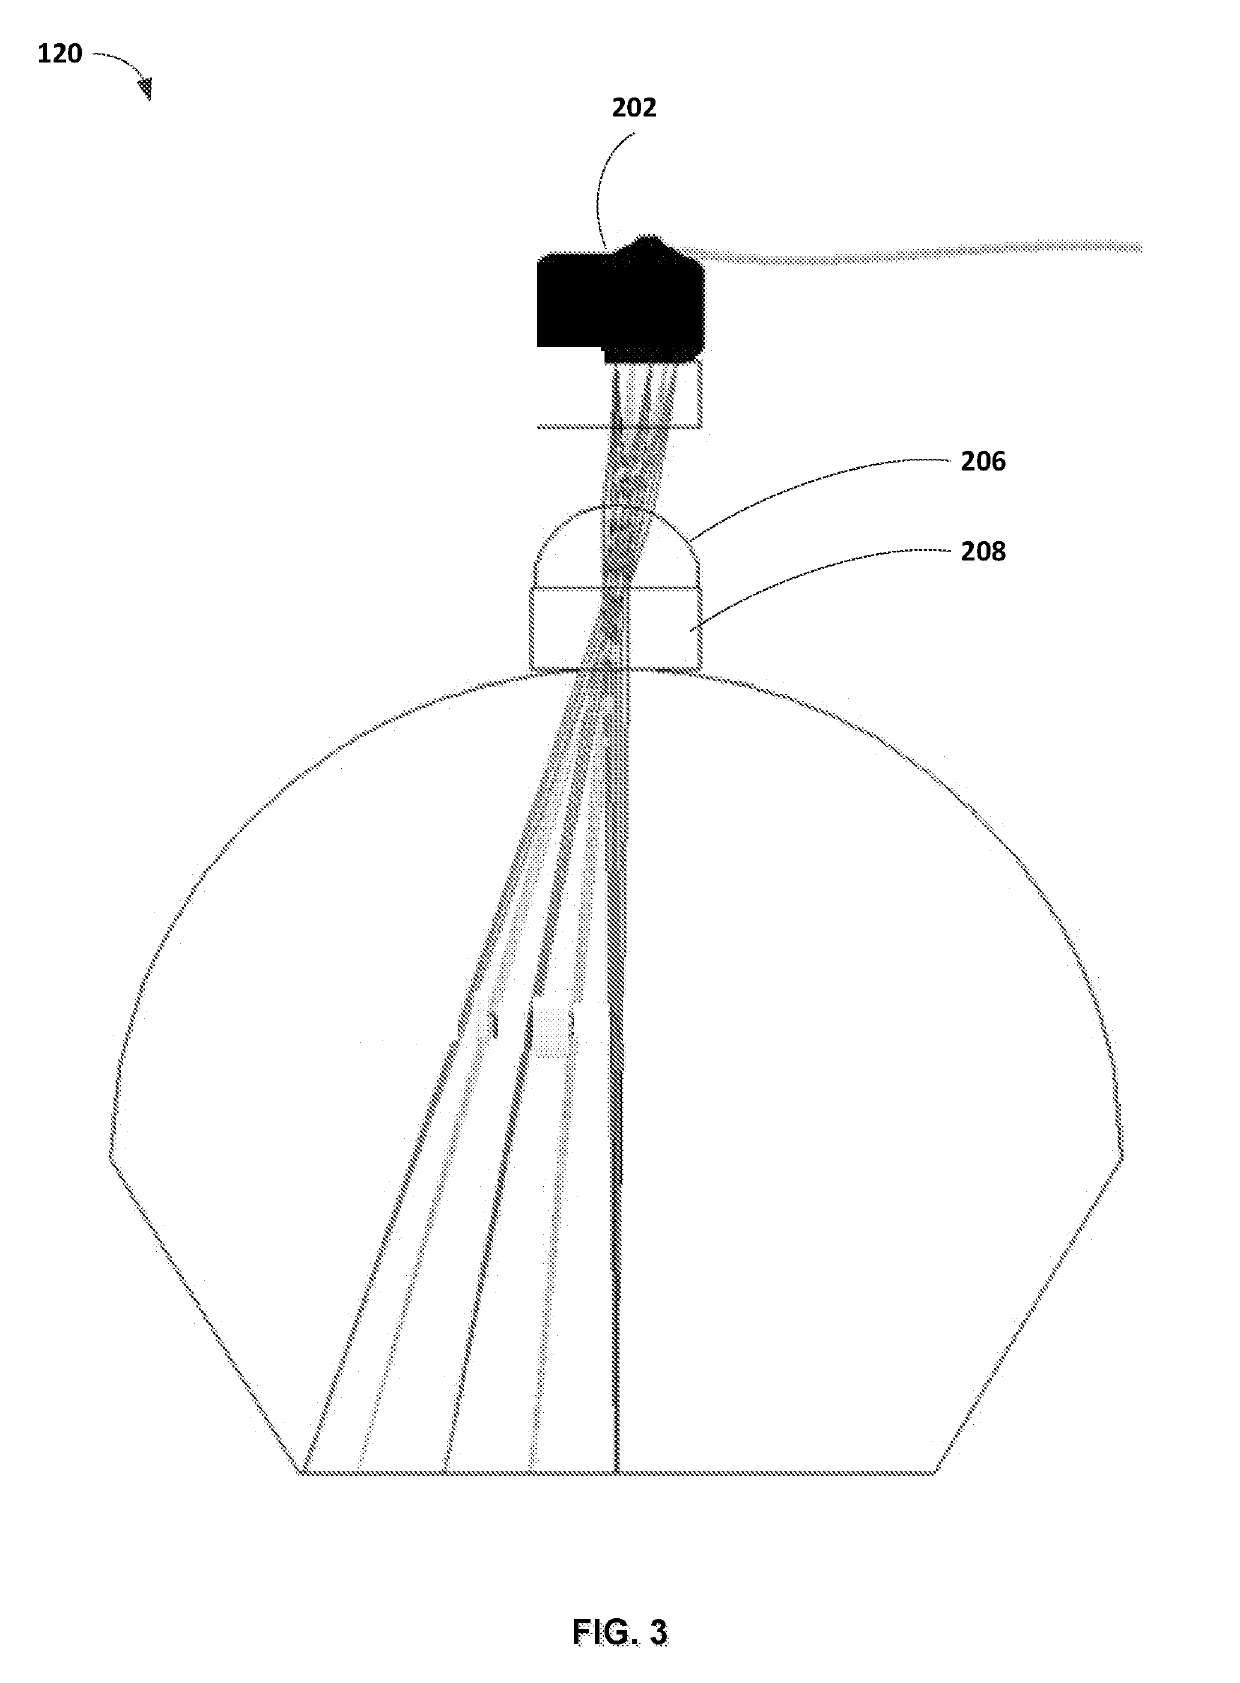 Microscope lens with integrated wide-field camera and beam scanning device